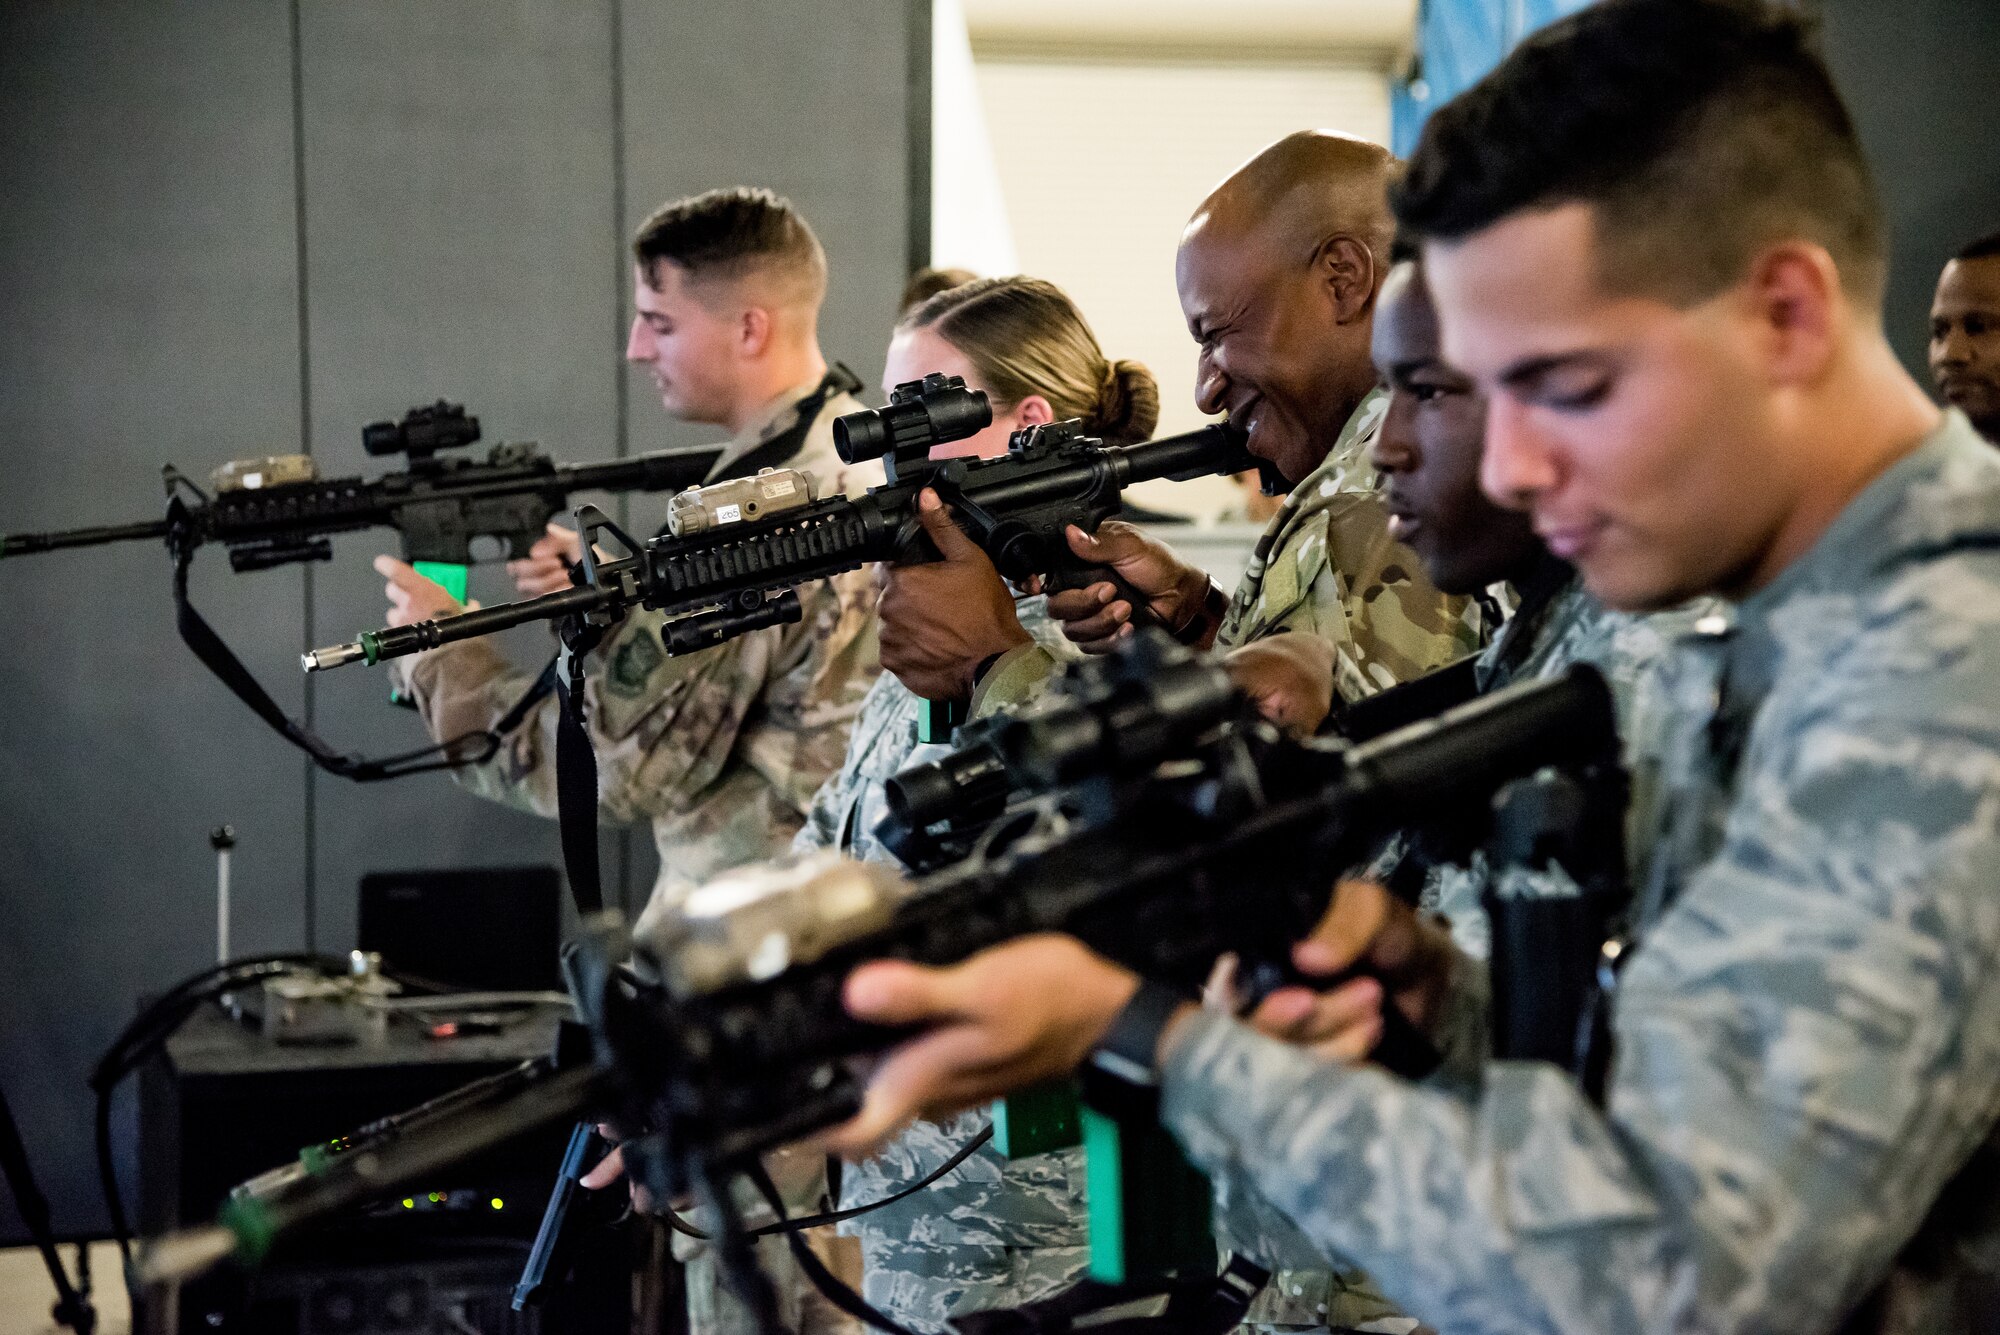 Chief Master Sgt. of the Air Force Kaleth O. Wright participates in a security forces simulator exercise with members of the 436th Security Forces Squadron at Dover Air Force Base, Delaware, September 3, 2019. The security forces visit was a part of a two-day tour of Dover AFB. (U.S. Air Force photo by Staff Sgt. Damien Taylor)